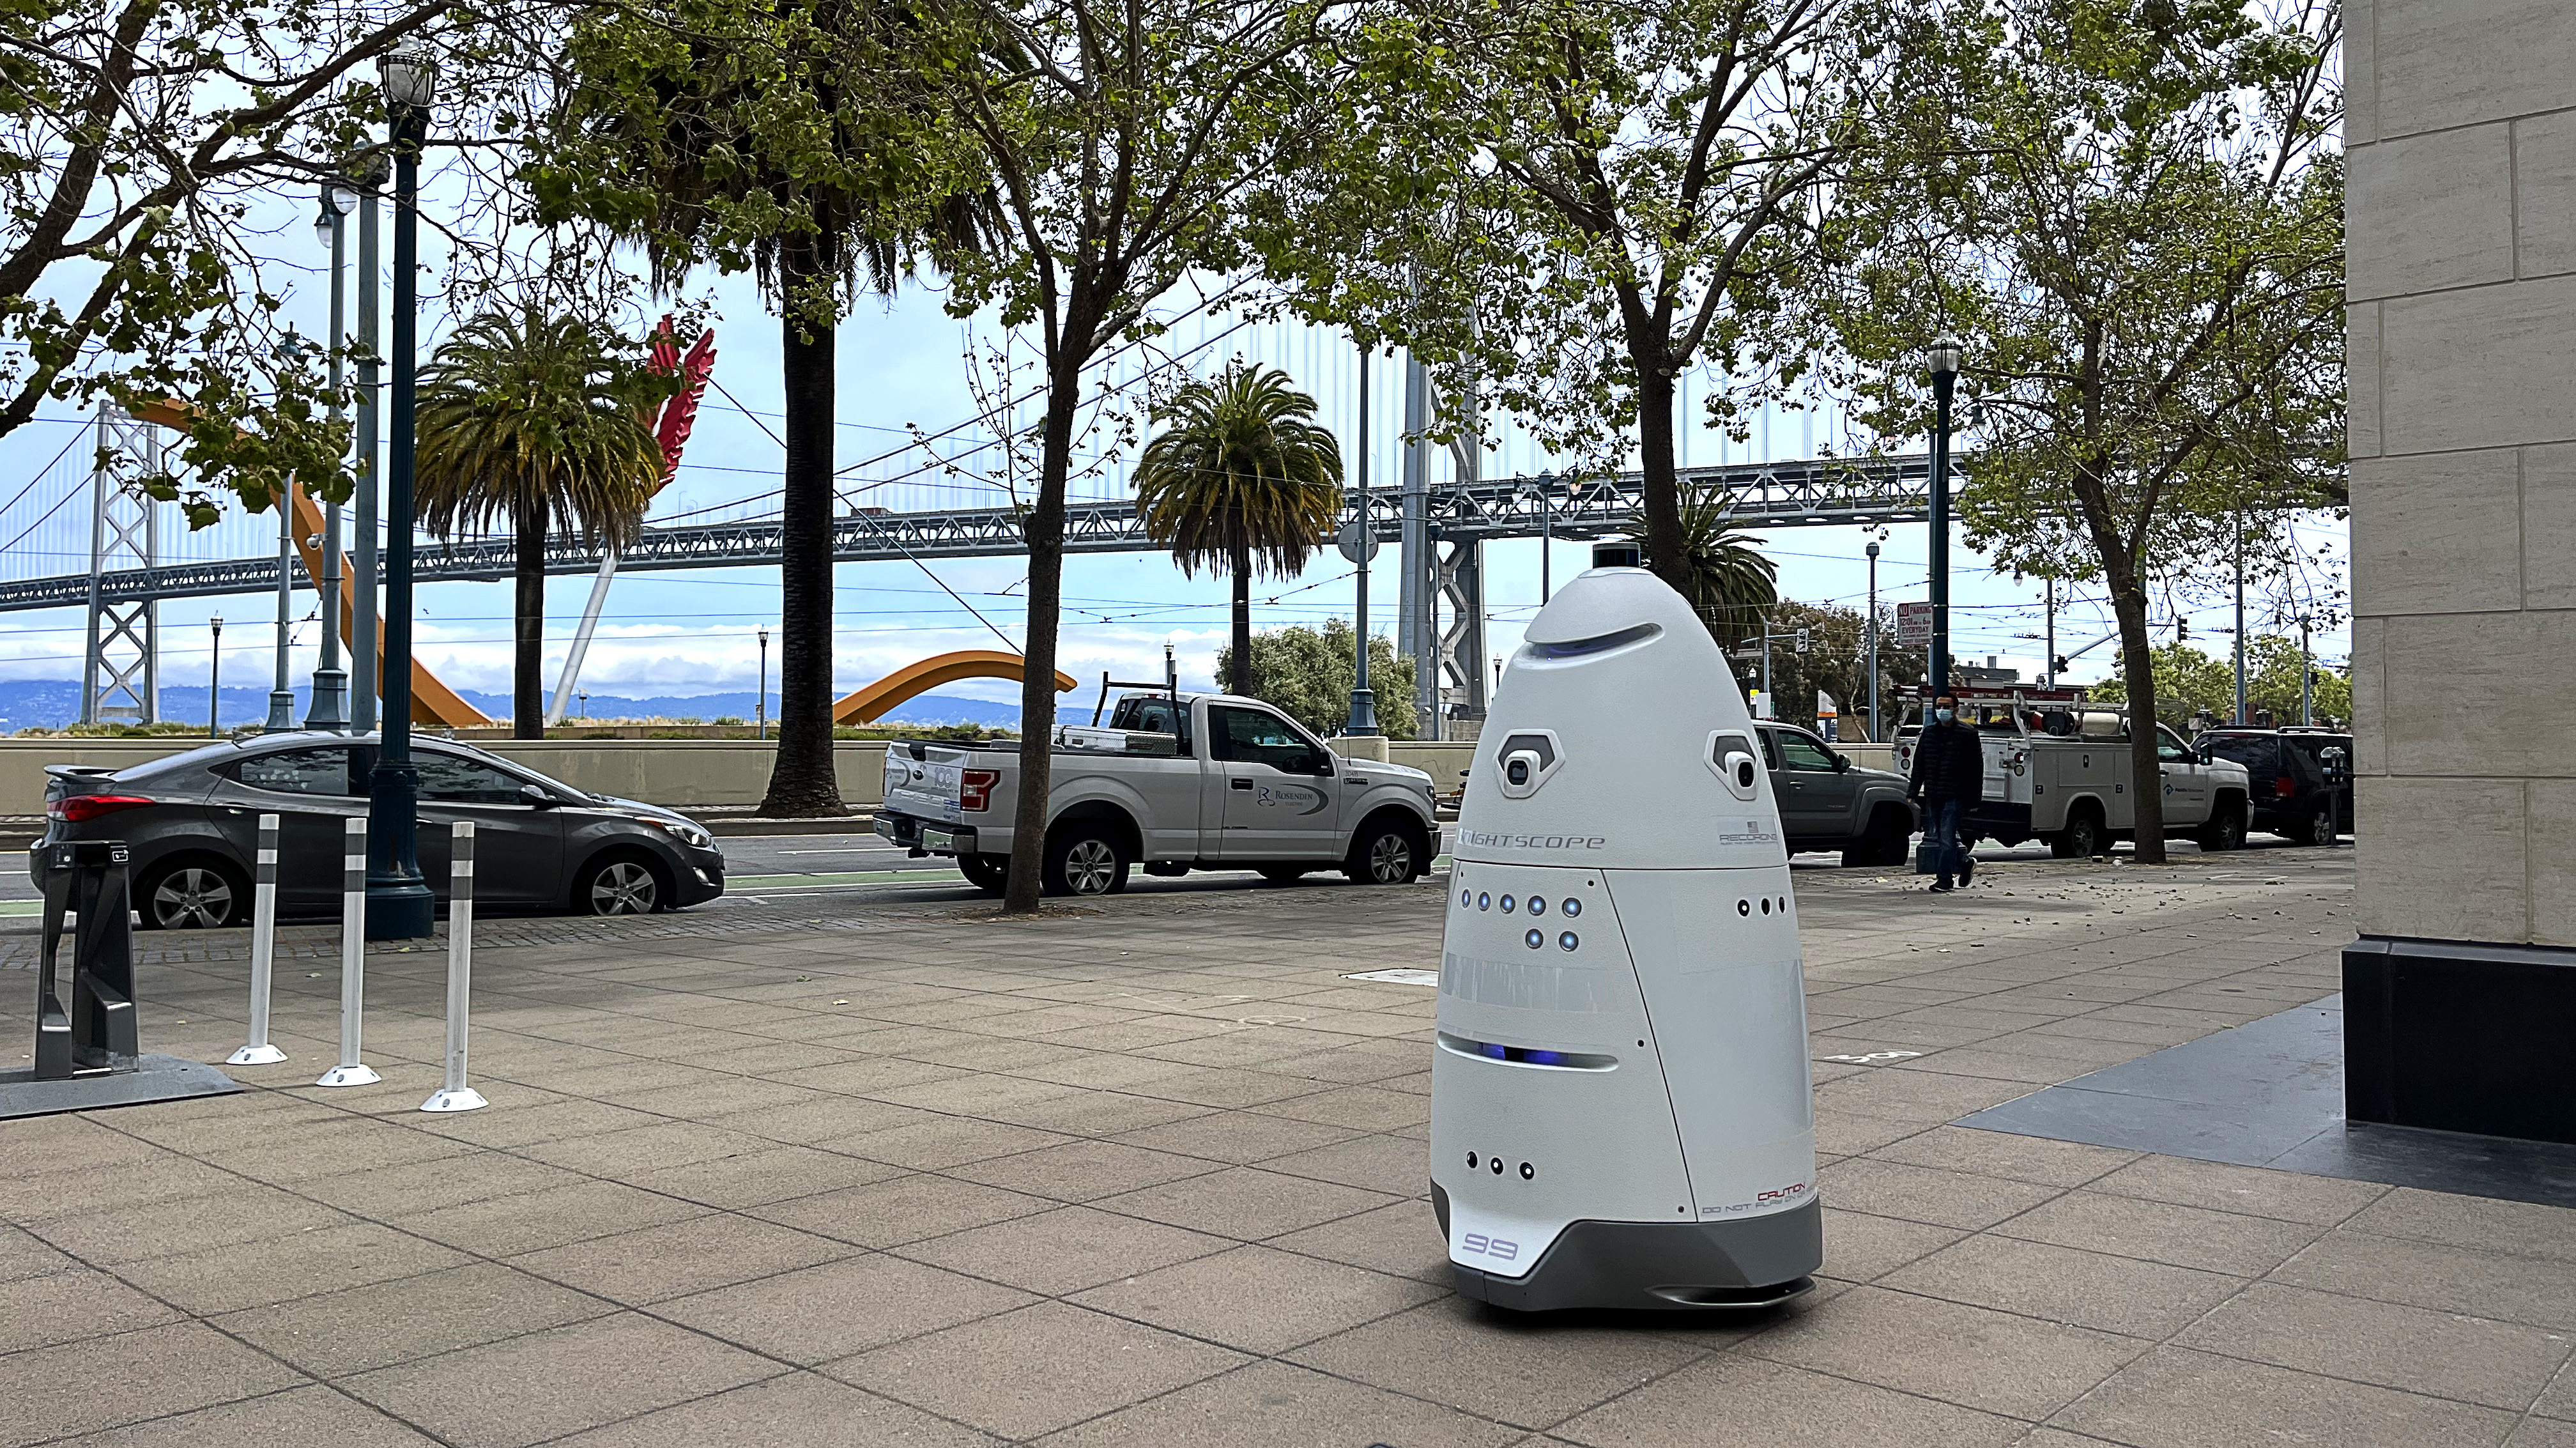 Knightscope Deploys Another Bay Area Security Robot